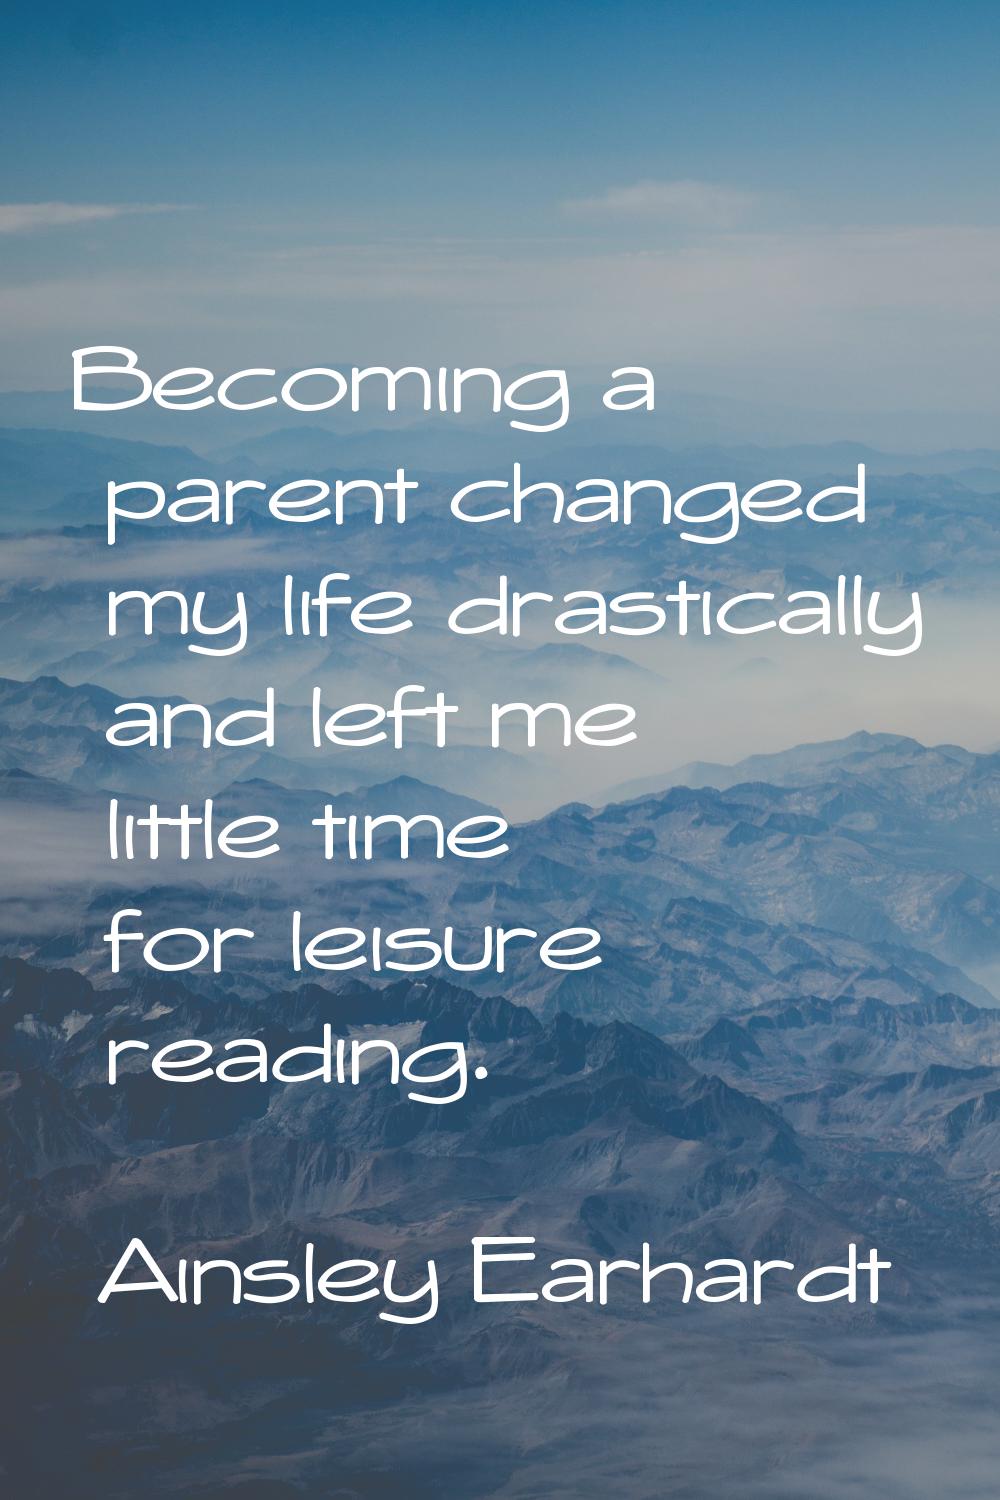 Becoming a parent changed my life drastically and left me little time for leisure reading.